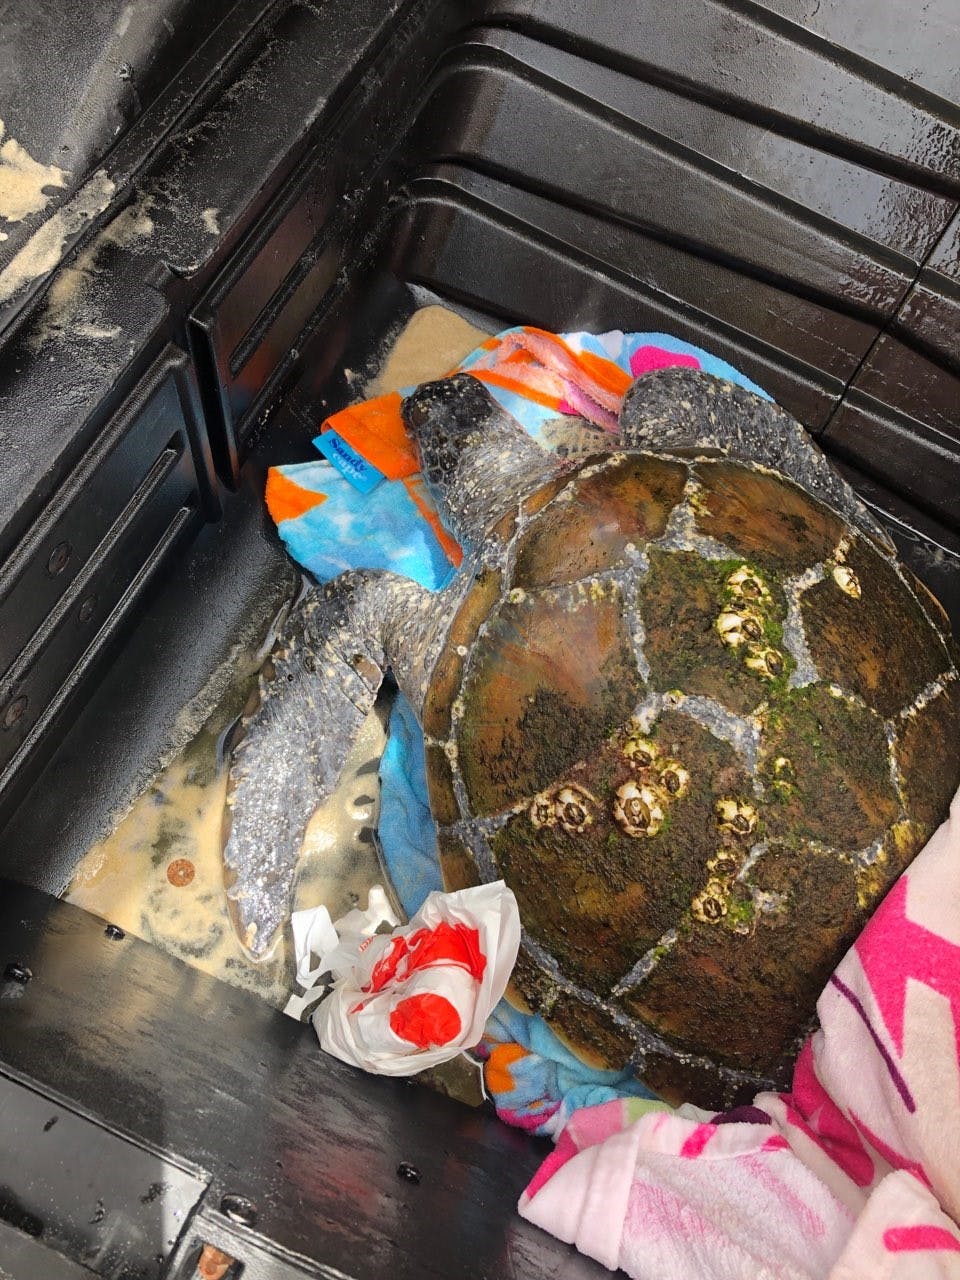 Lion the Green Sea Turtle rescued at Kingscliff due to ingesting marine debris – including plastics.